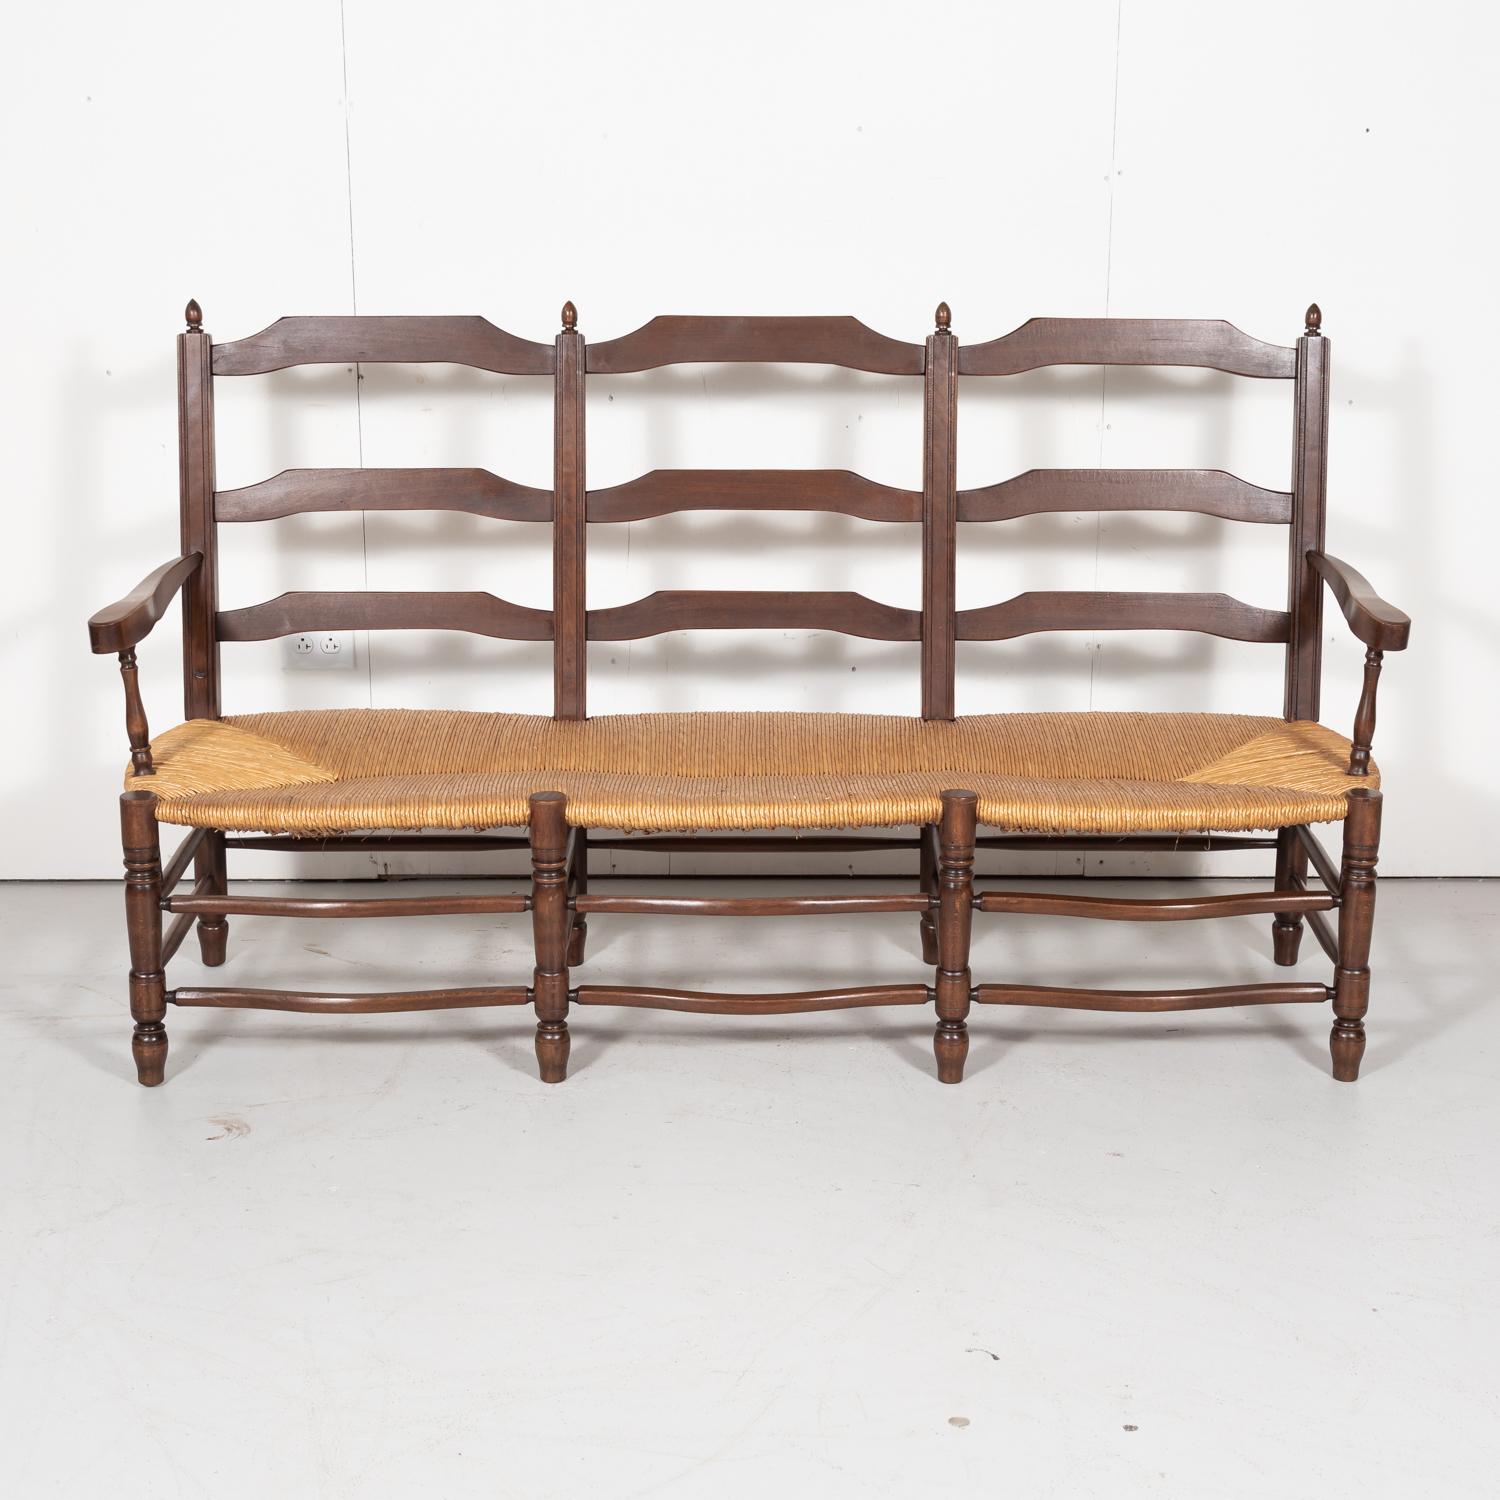 Country French settee or radassier in walnut, circa 1930s. This double arm Normandy bench seats three and features a handwoven rush seat and ladder-back. A wonderful rustic look that captures the charm and quaintness of rural France. This bench